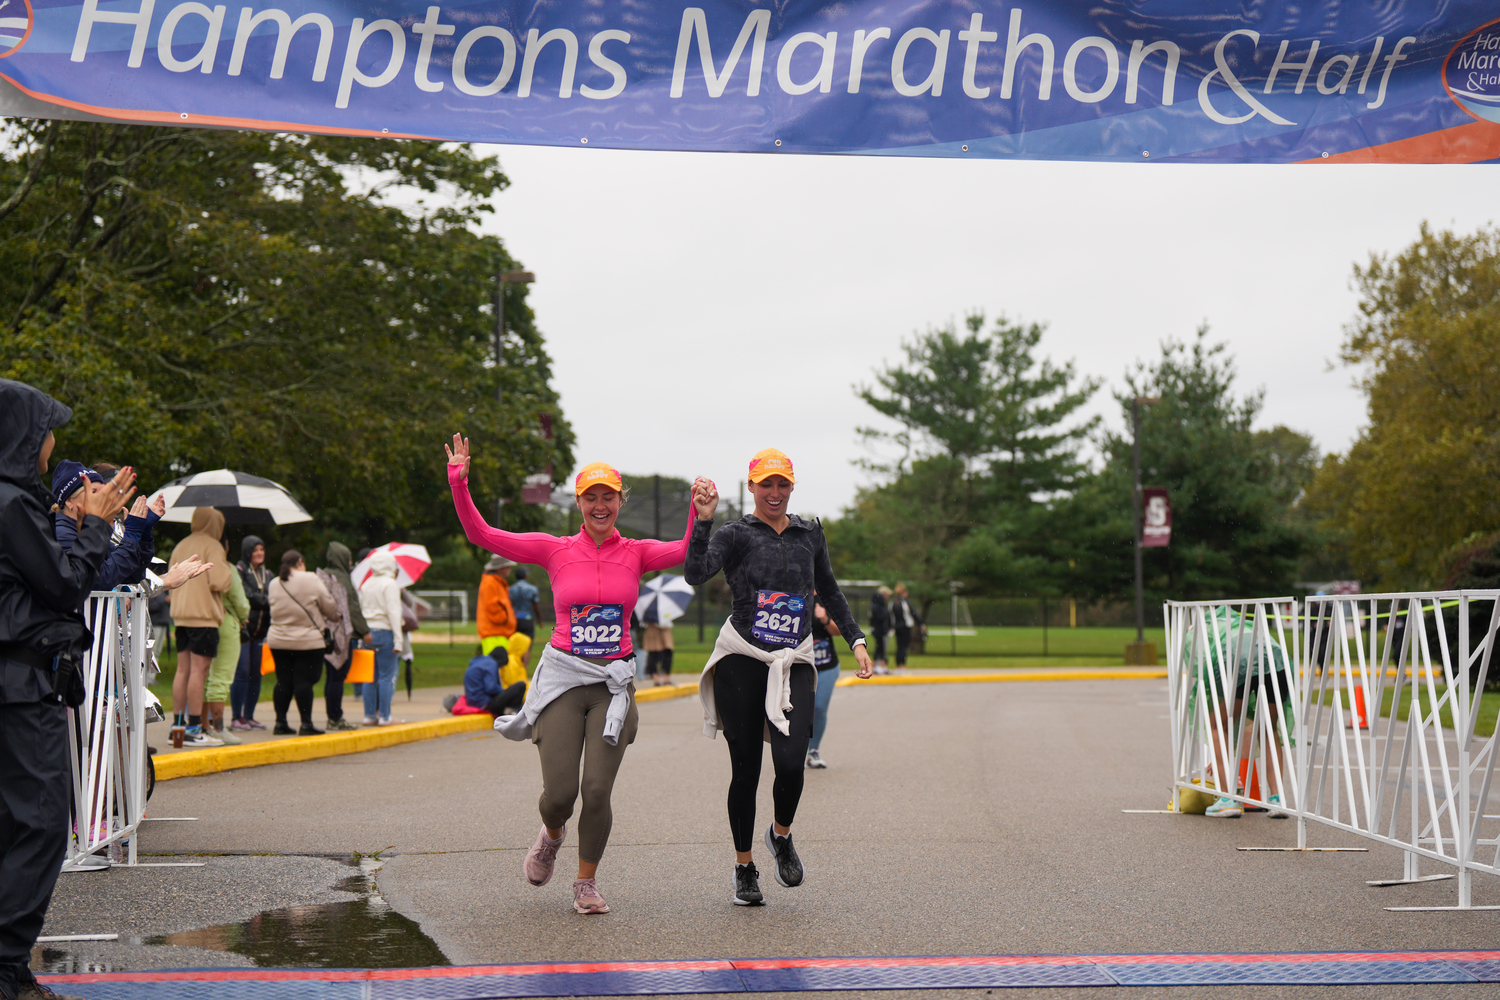 Jennifer Taylor, left, and Charly Dahlquist cross the finish line together in the marathon.   RON ESPOSITO